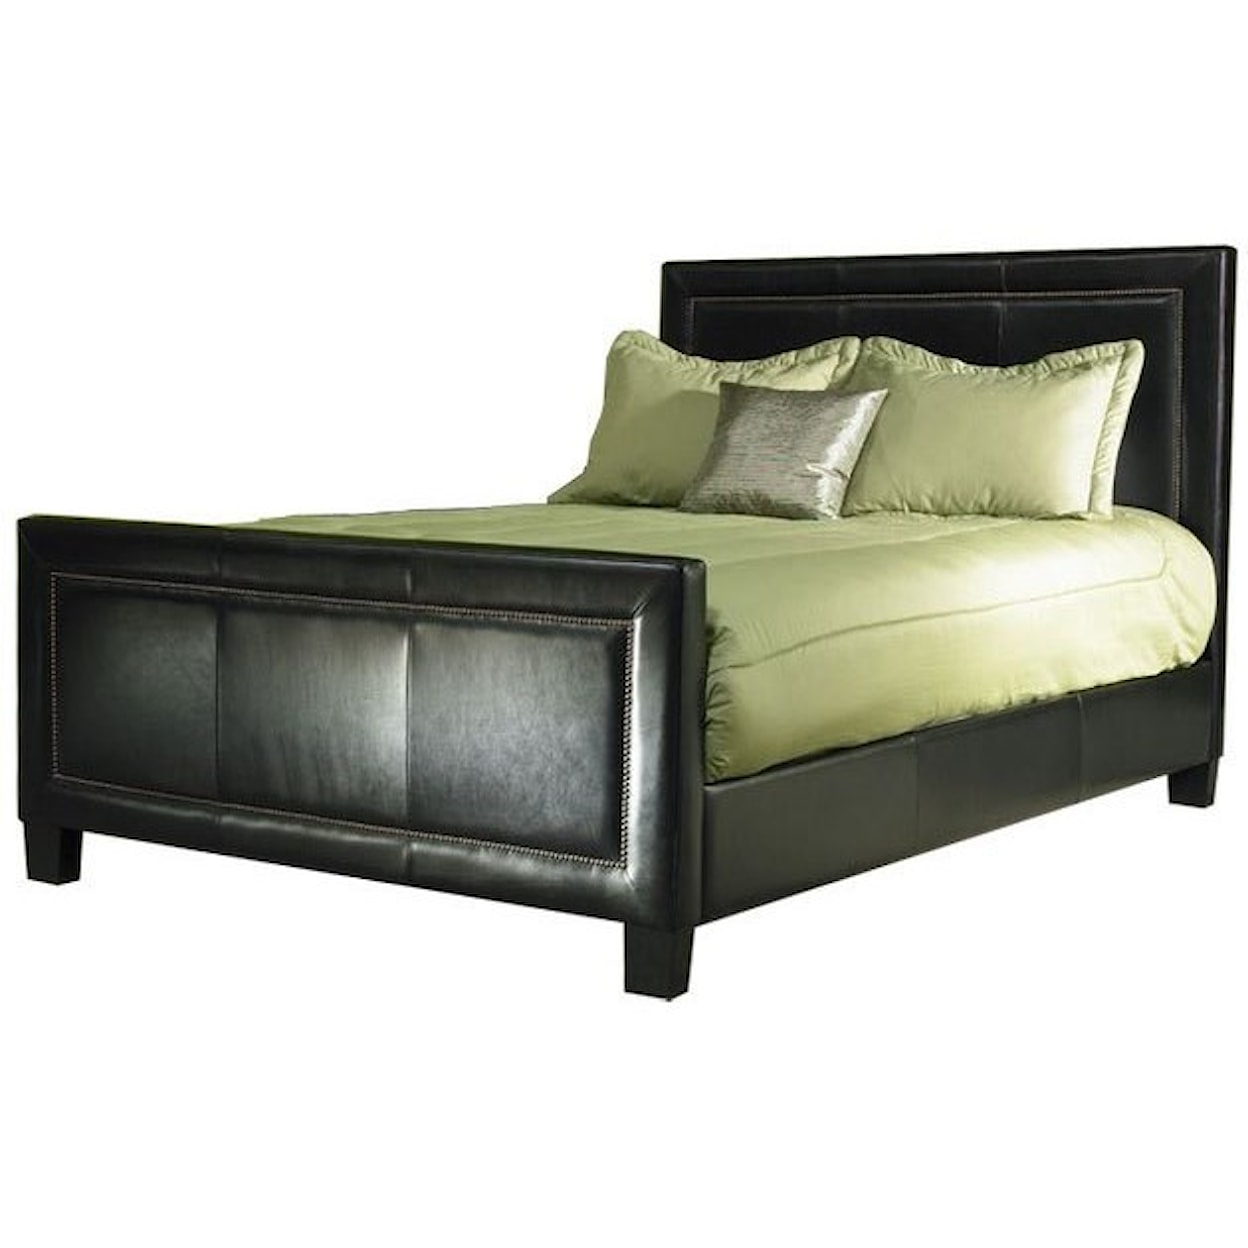 American Leather Copeland Upholstered Full Bed